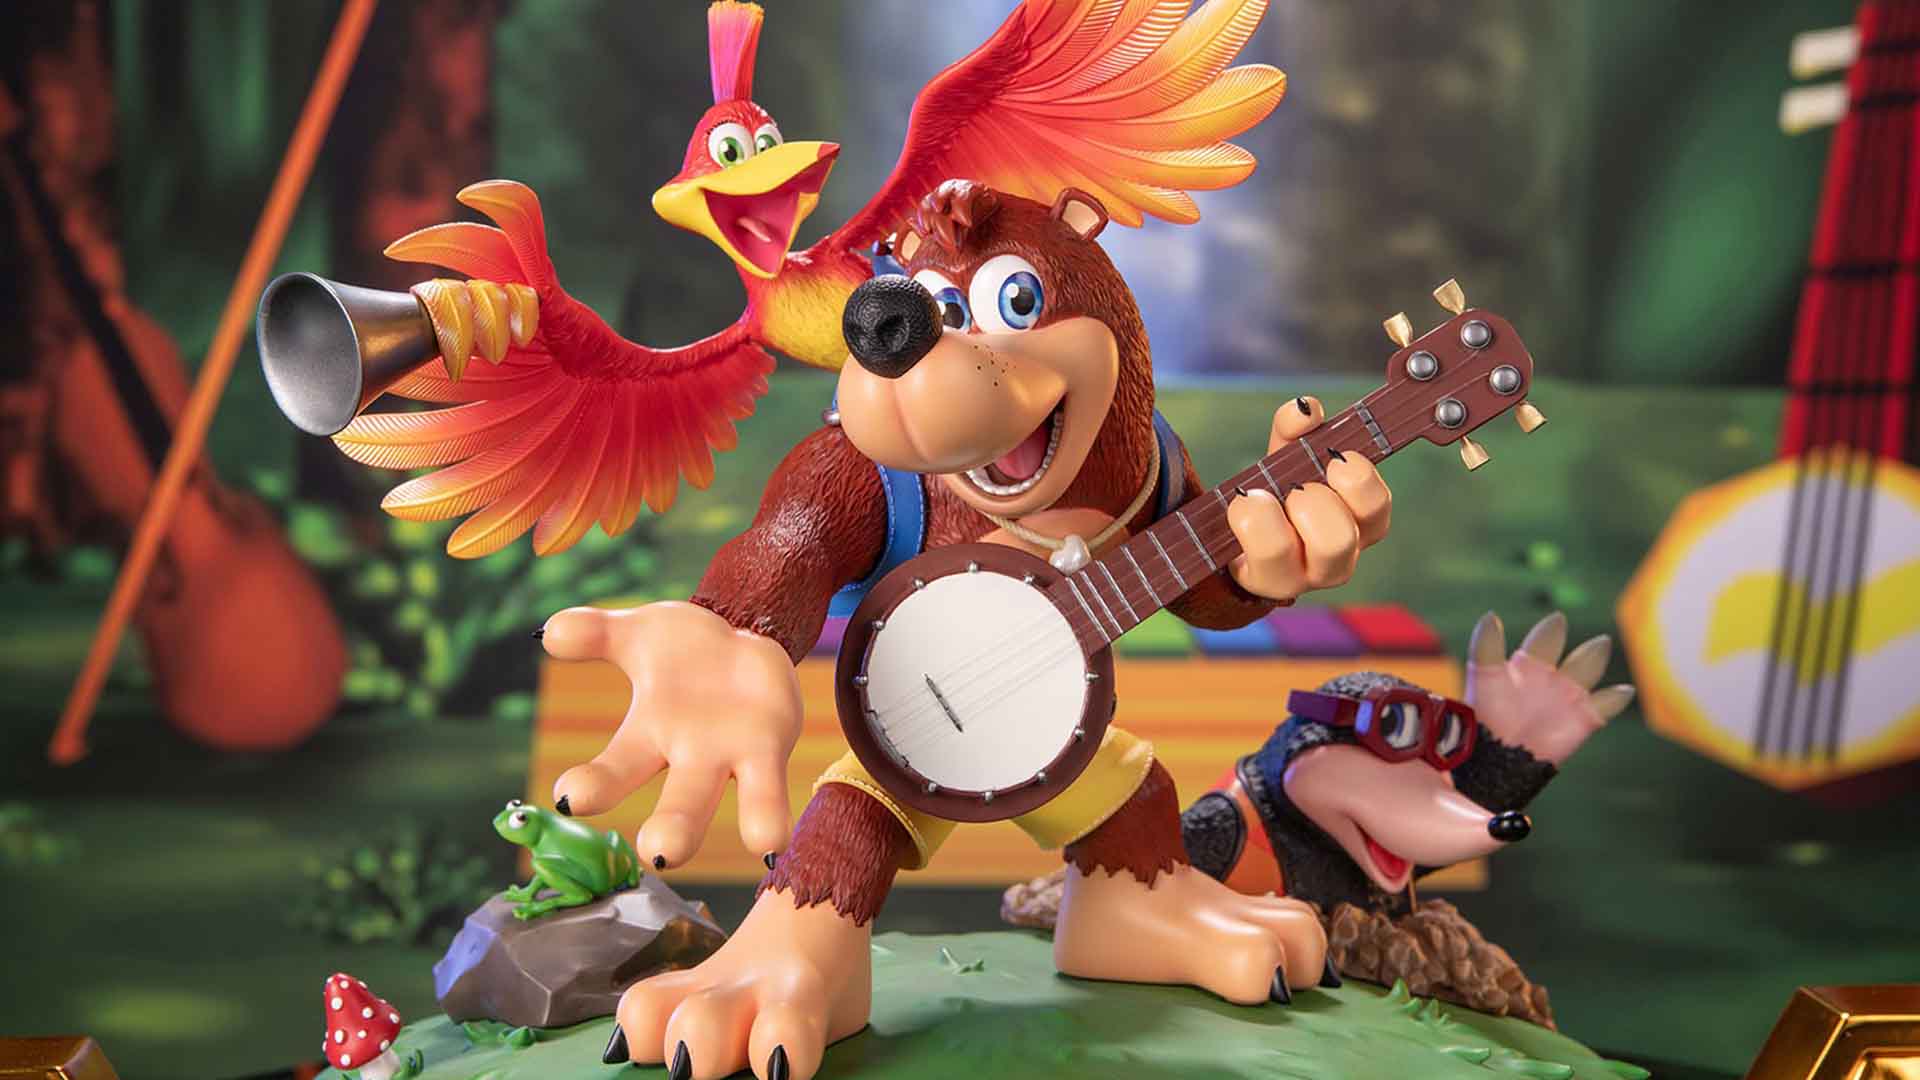 Banjo-Kazooie Duet Statue by First 4 Figures